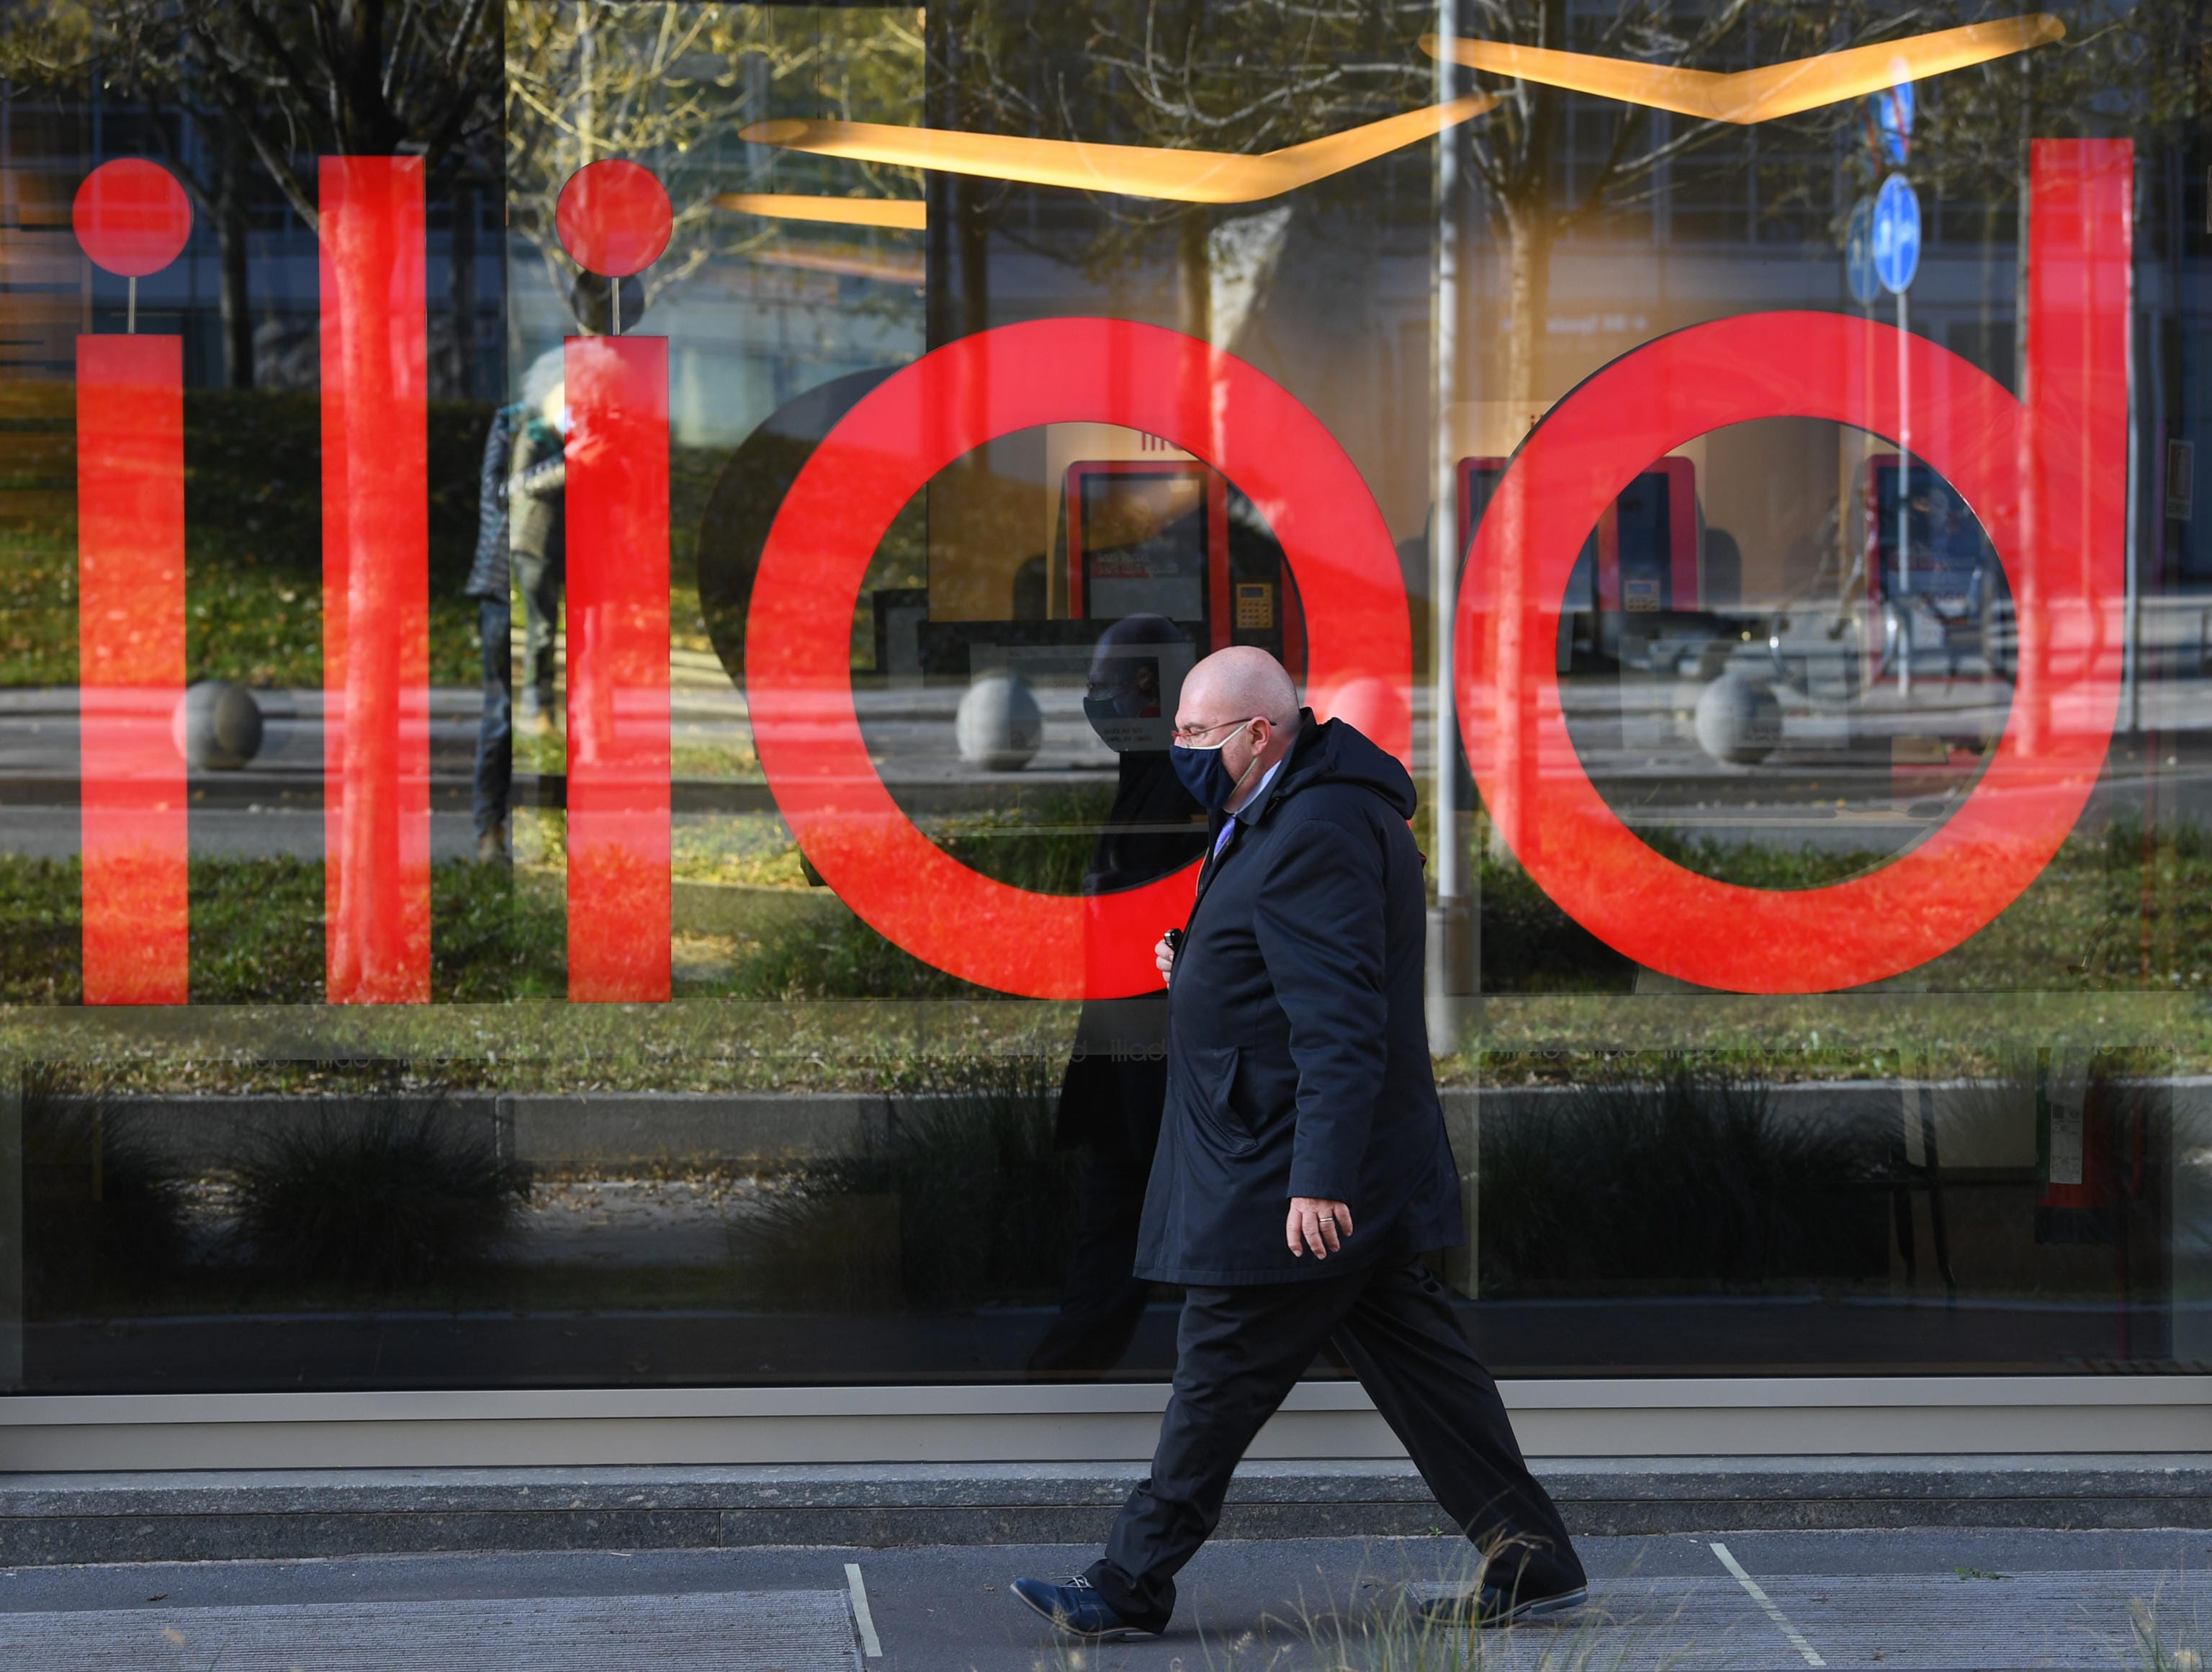 Vodafone rejects Iliad and Apax offer for Vodafone Italy